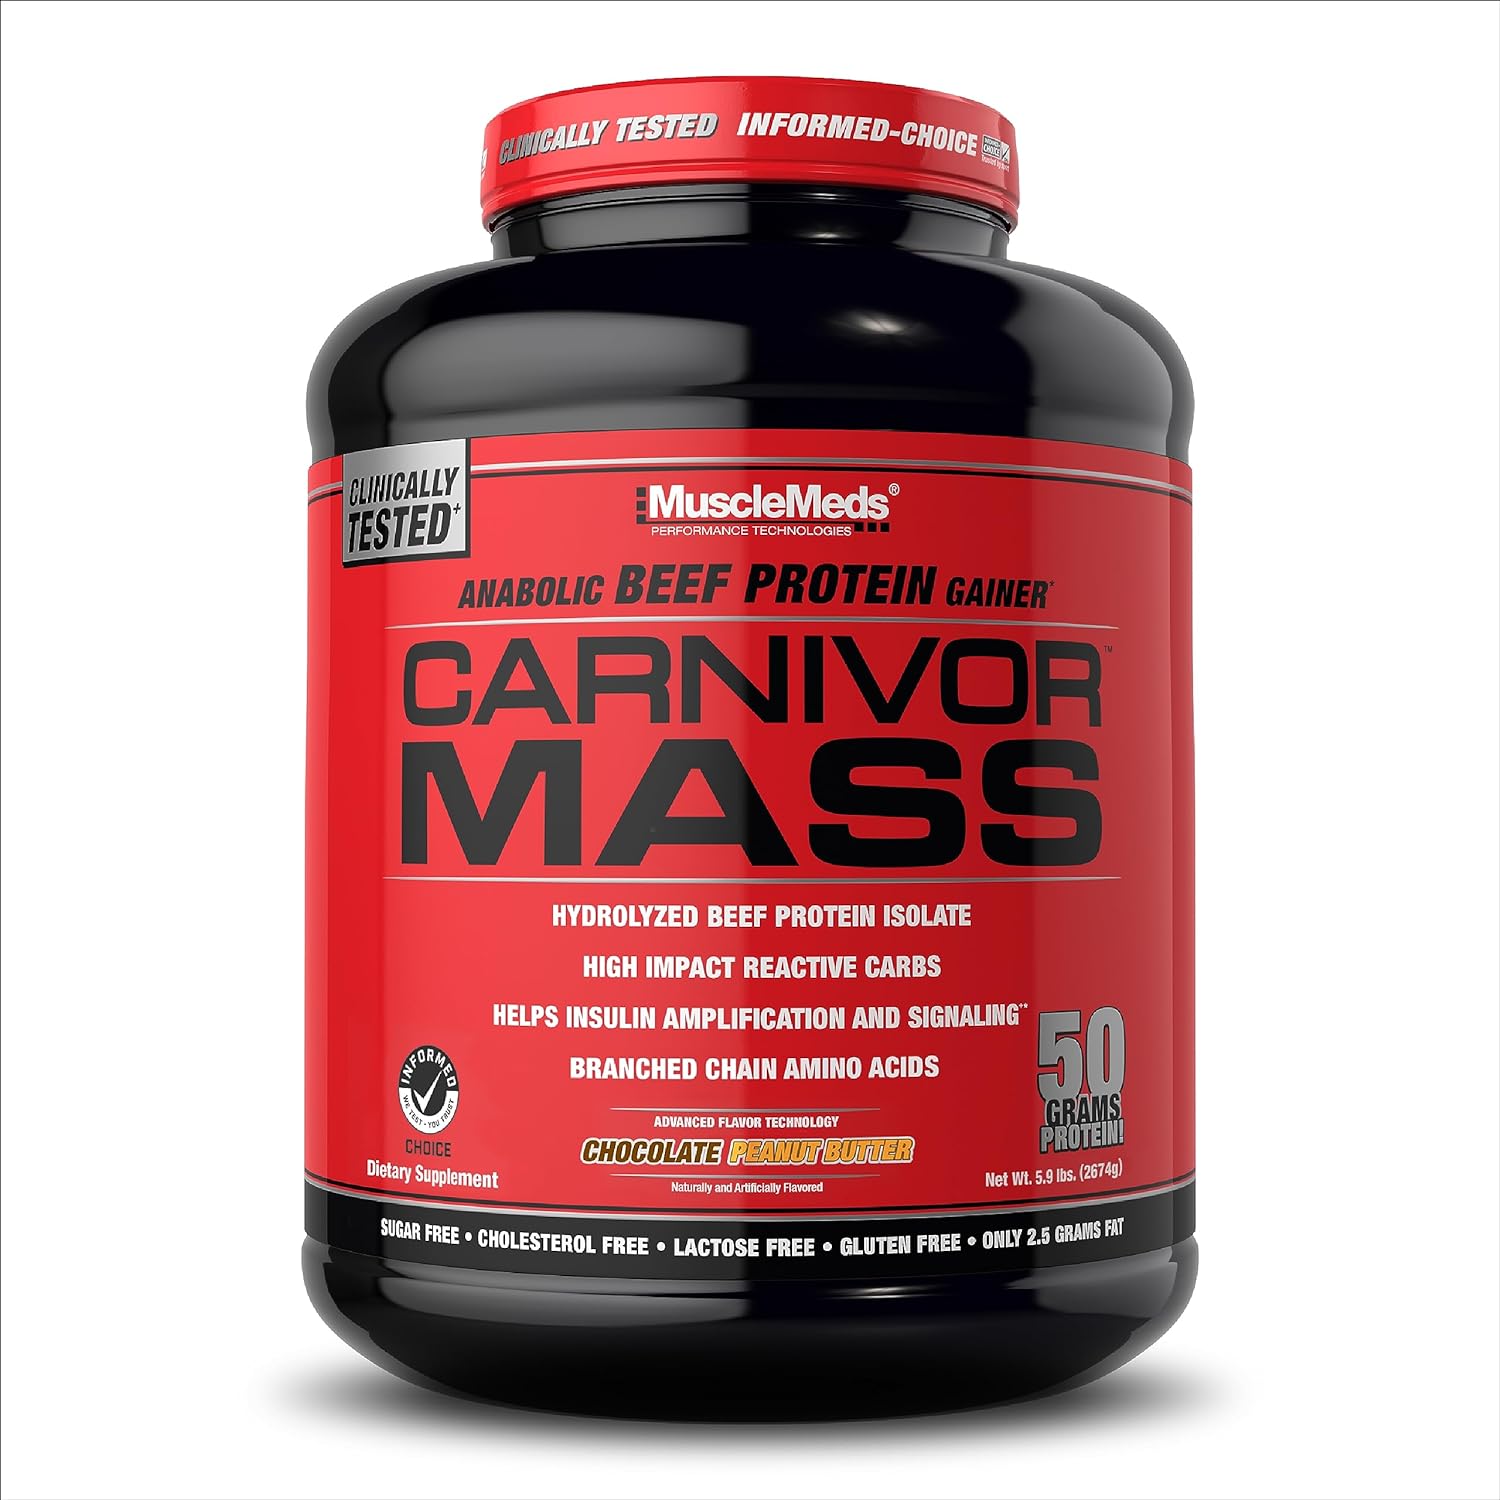 MuscleMeds Carnivor Mass Anabolic Beef Protein Gainer, Chocolate Peanu